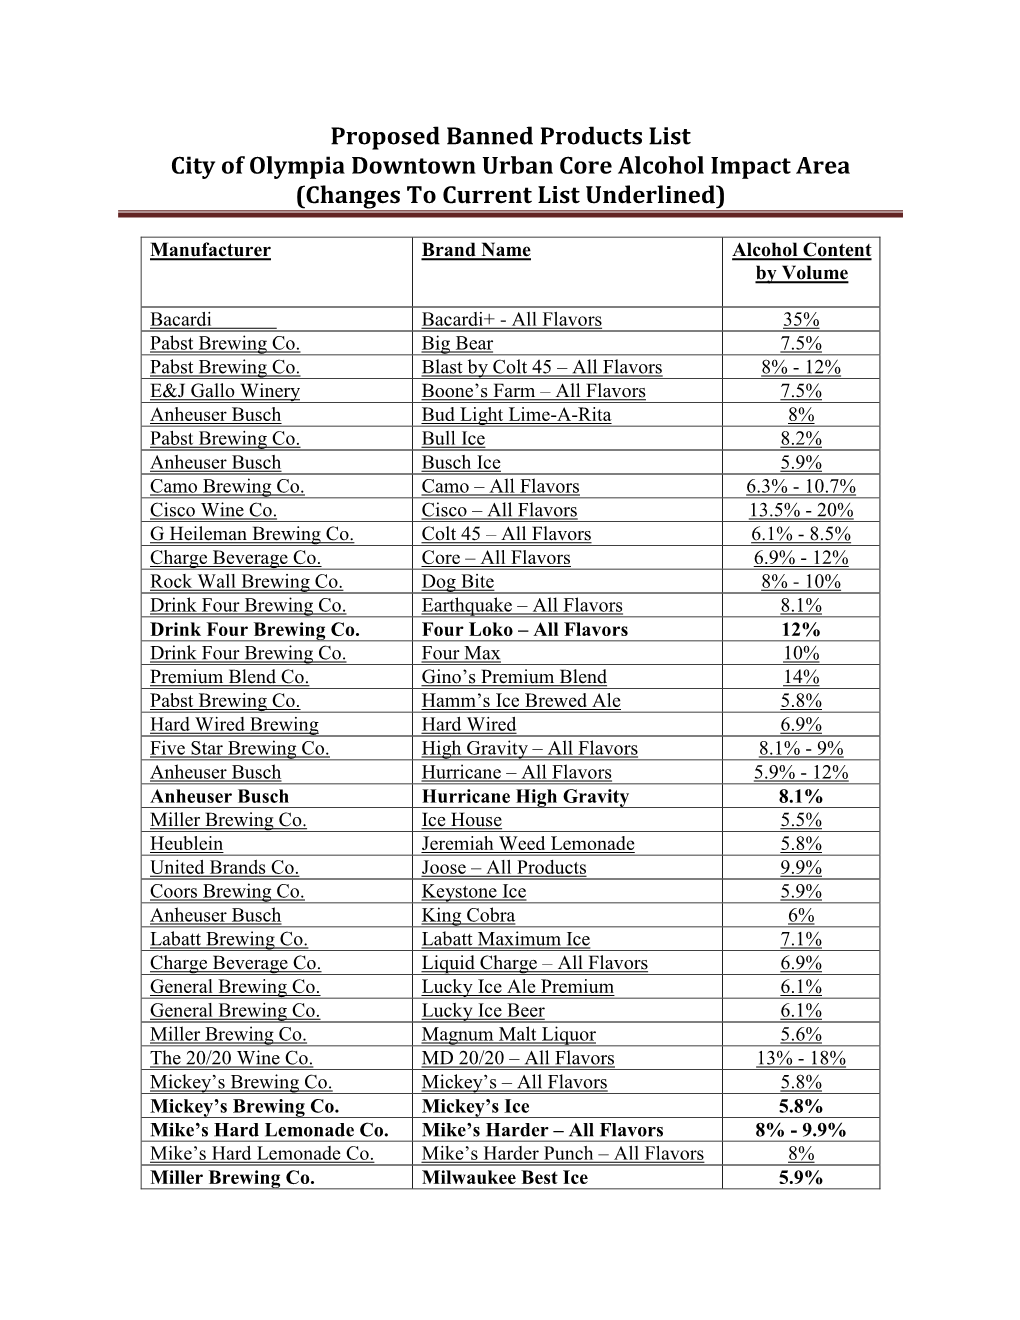 Proposed Banned Products List City of Olympia Downtown Urban Core Alcohol Impact Area (Changes to Current List Underlined)